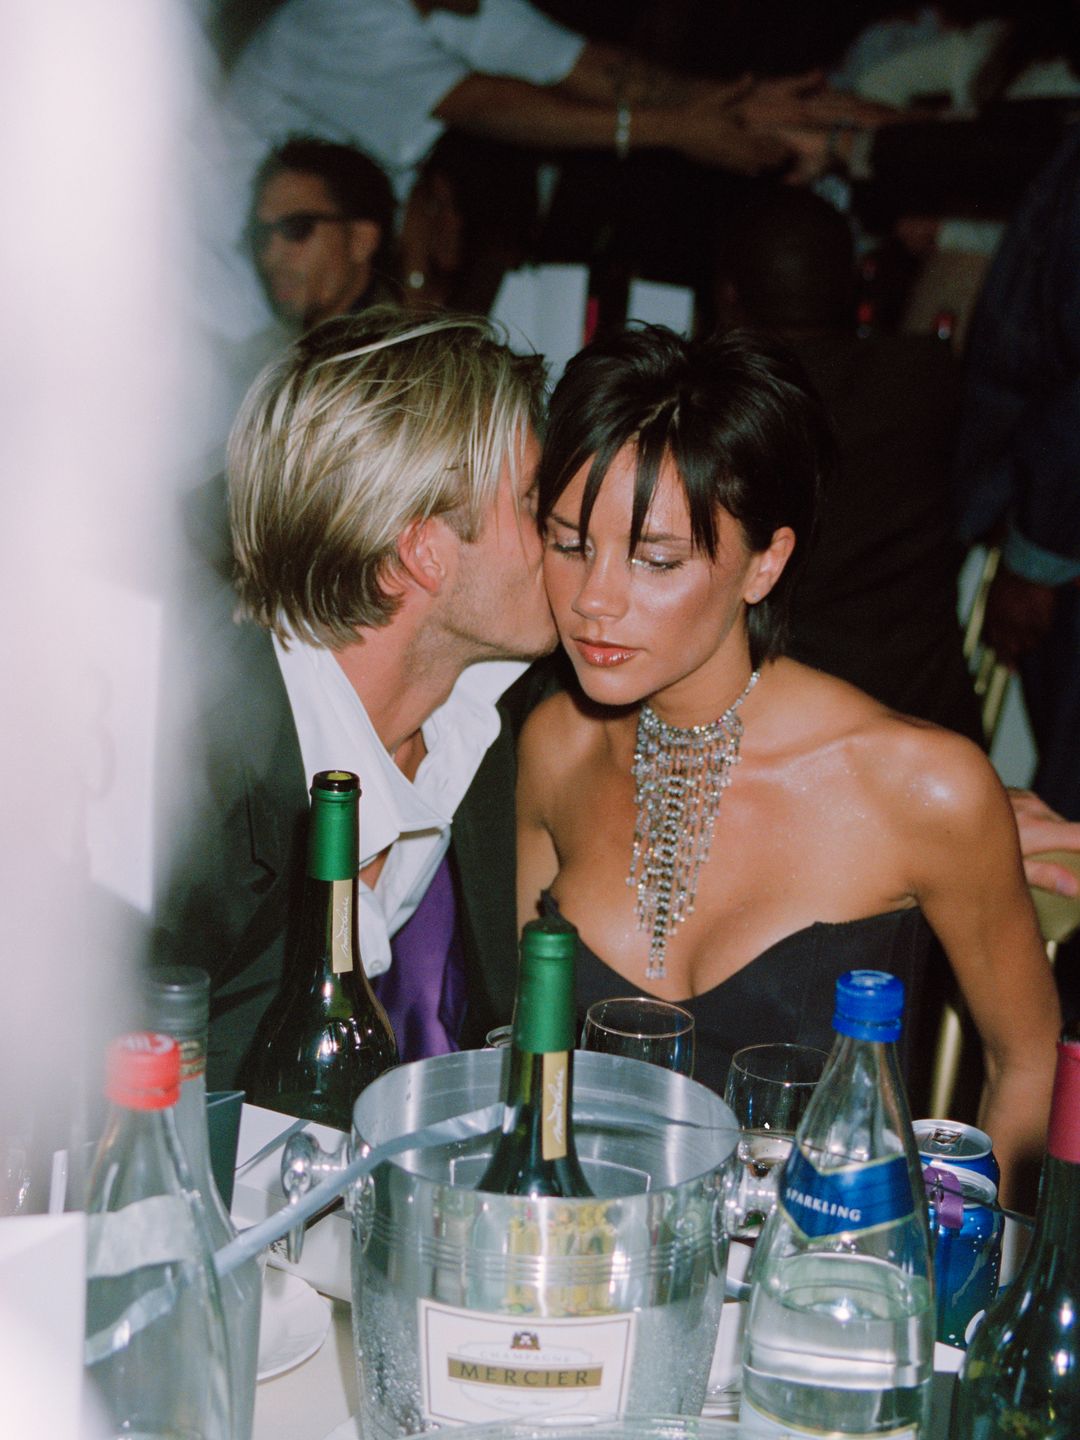 Victoria and David Beckham share an intimate moment back in 1999 at the MOBO Awards